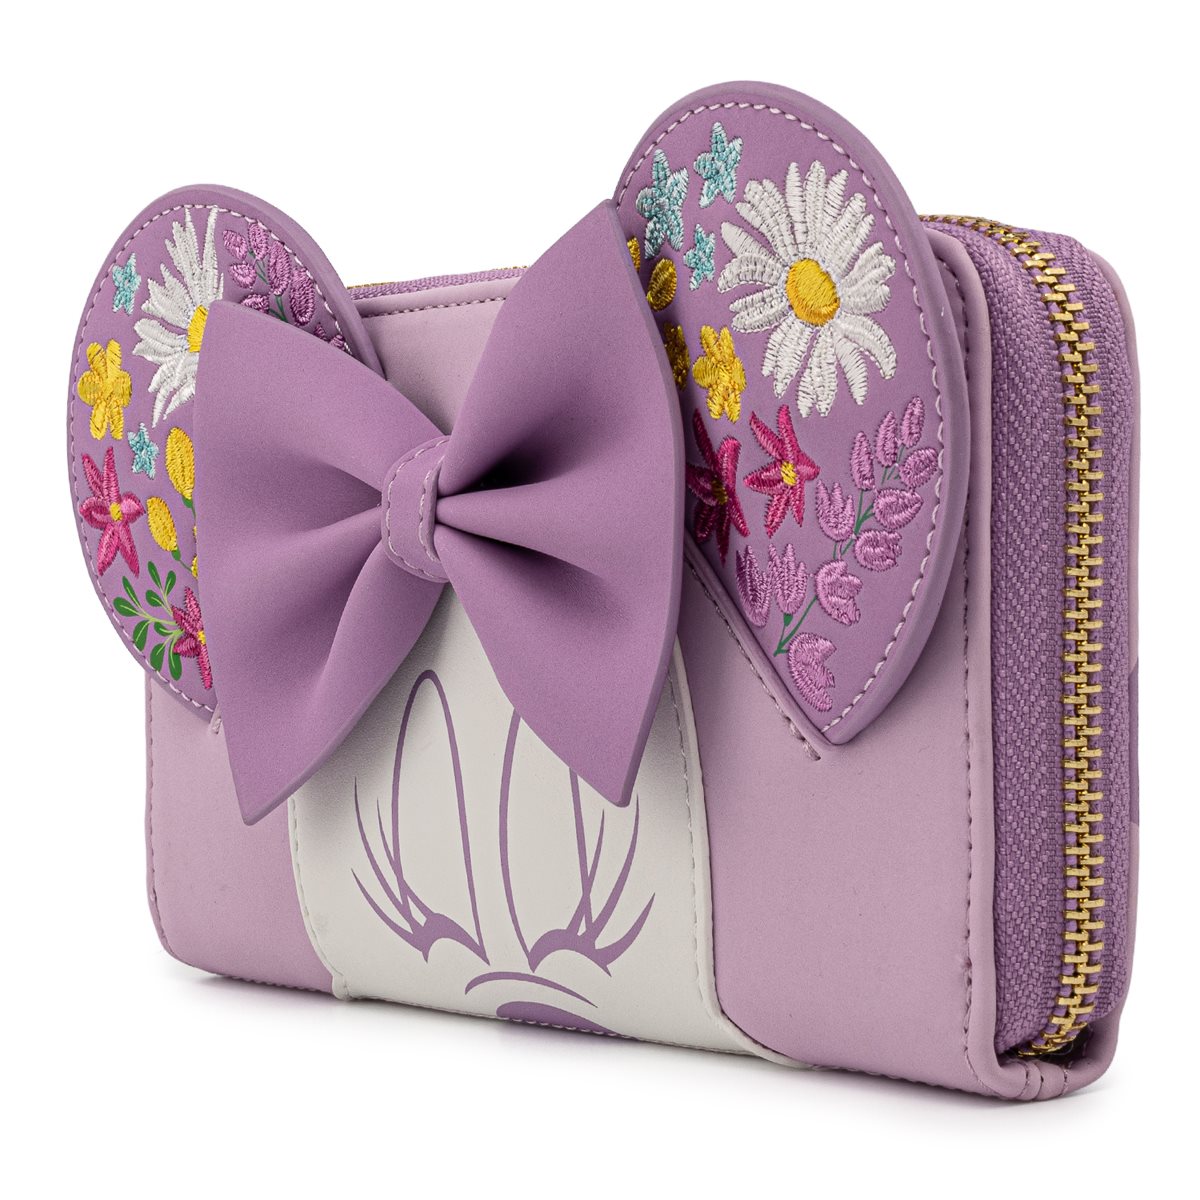 Minnie Mouse Floral Zip-Around Wallet - Entertainment Earth